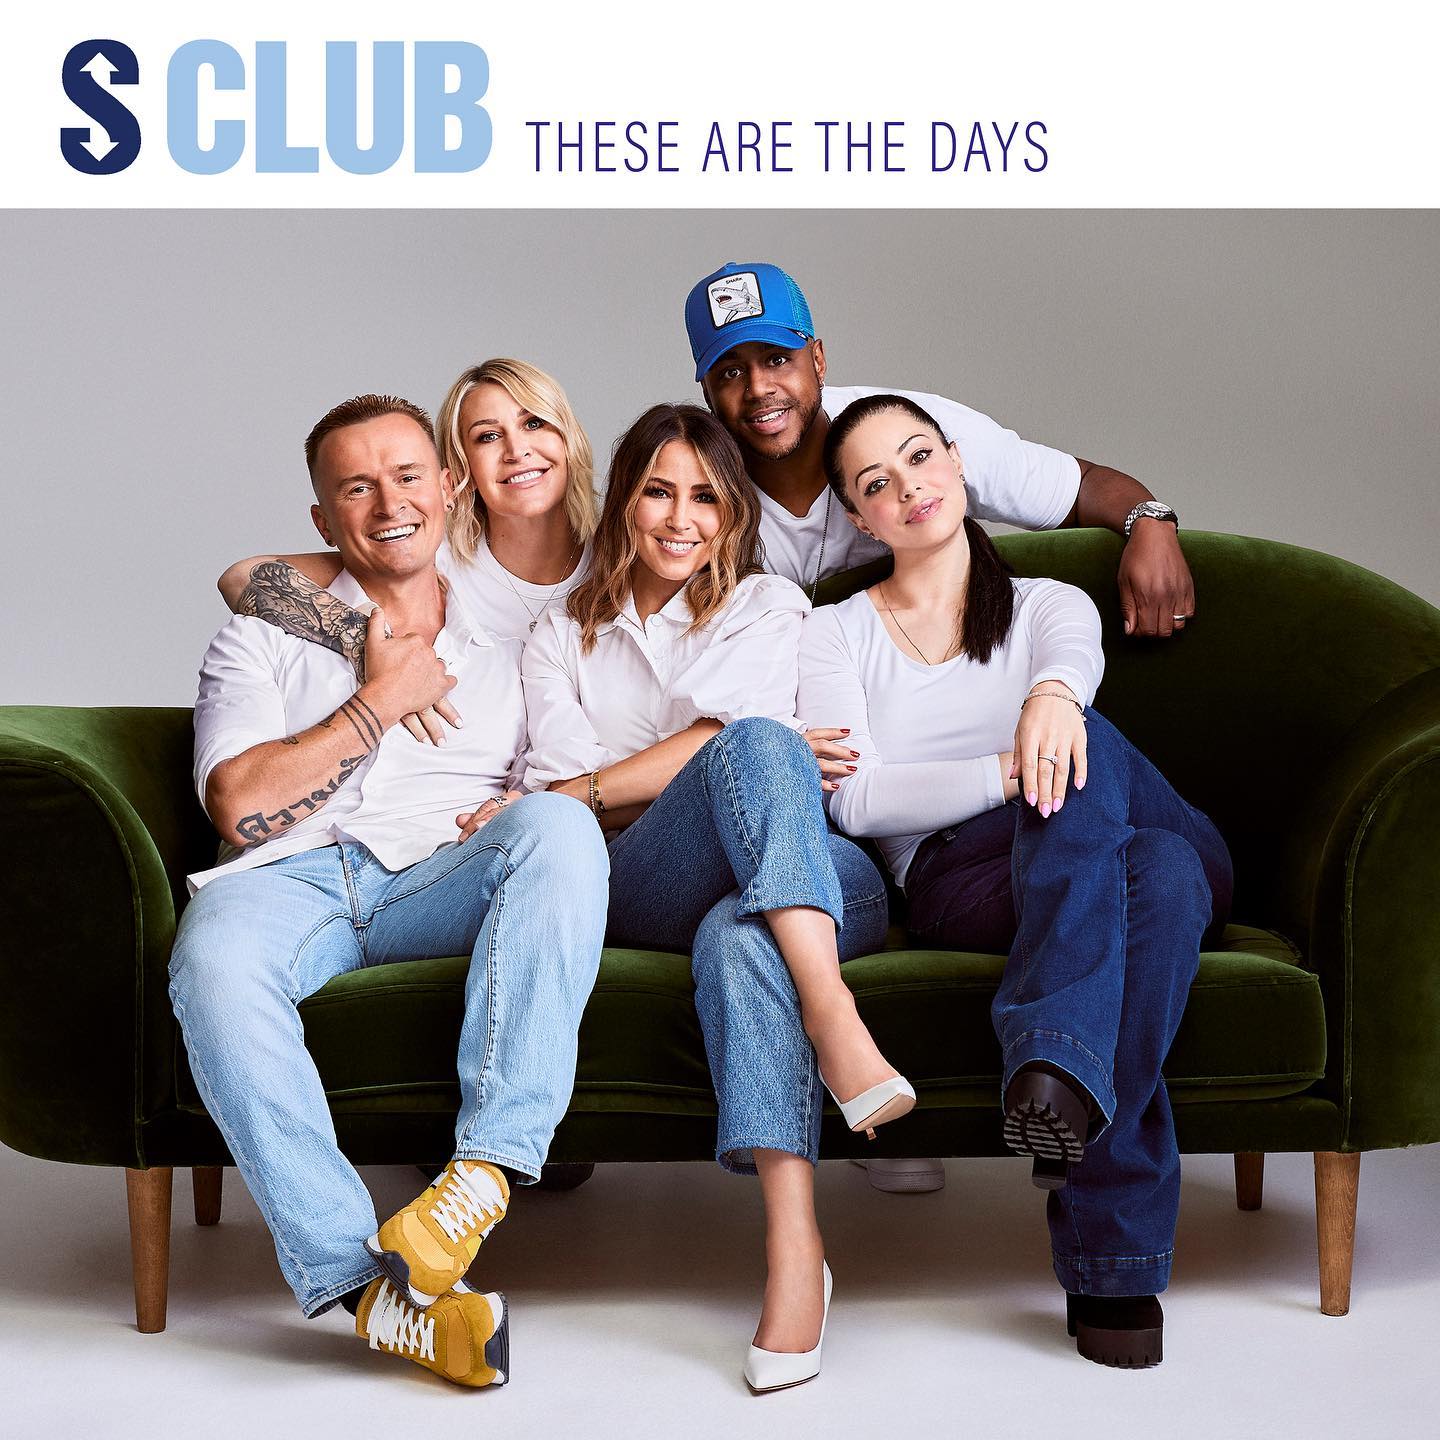 S Club These Are the Days cover artwork